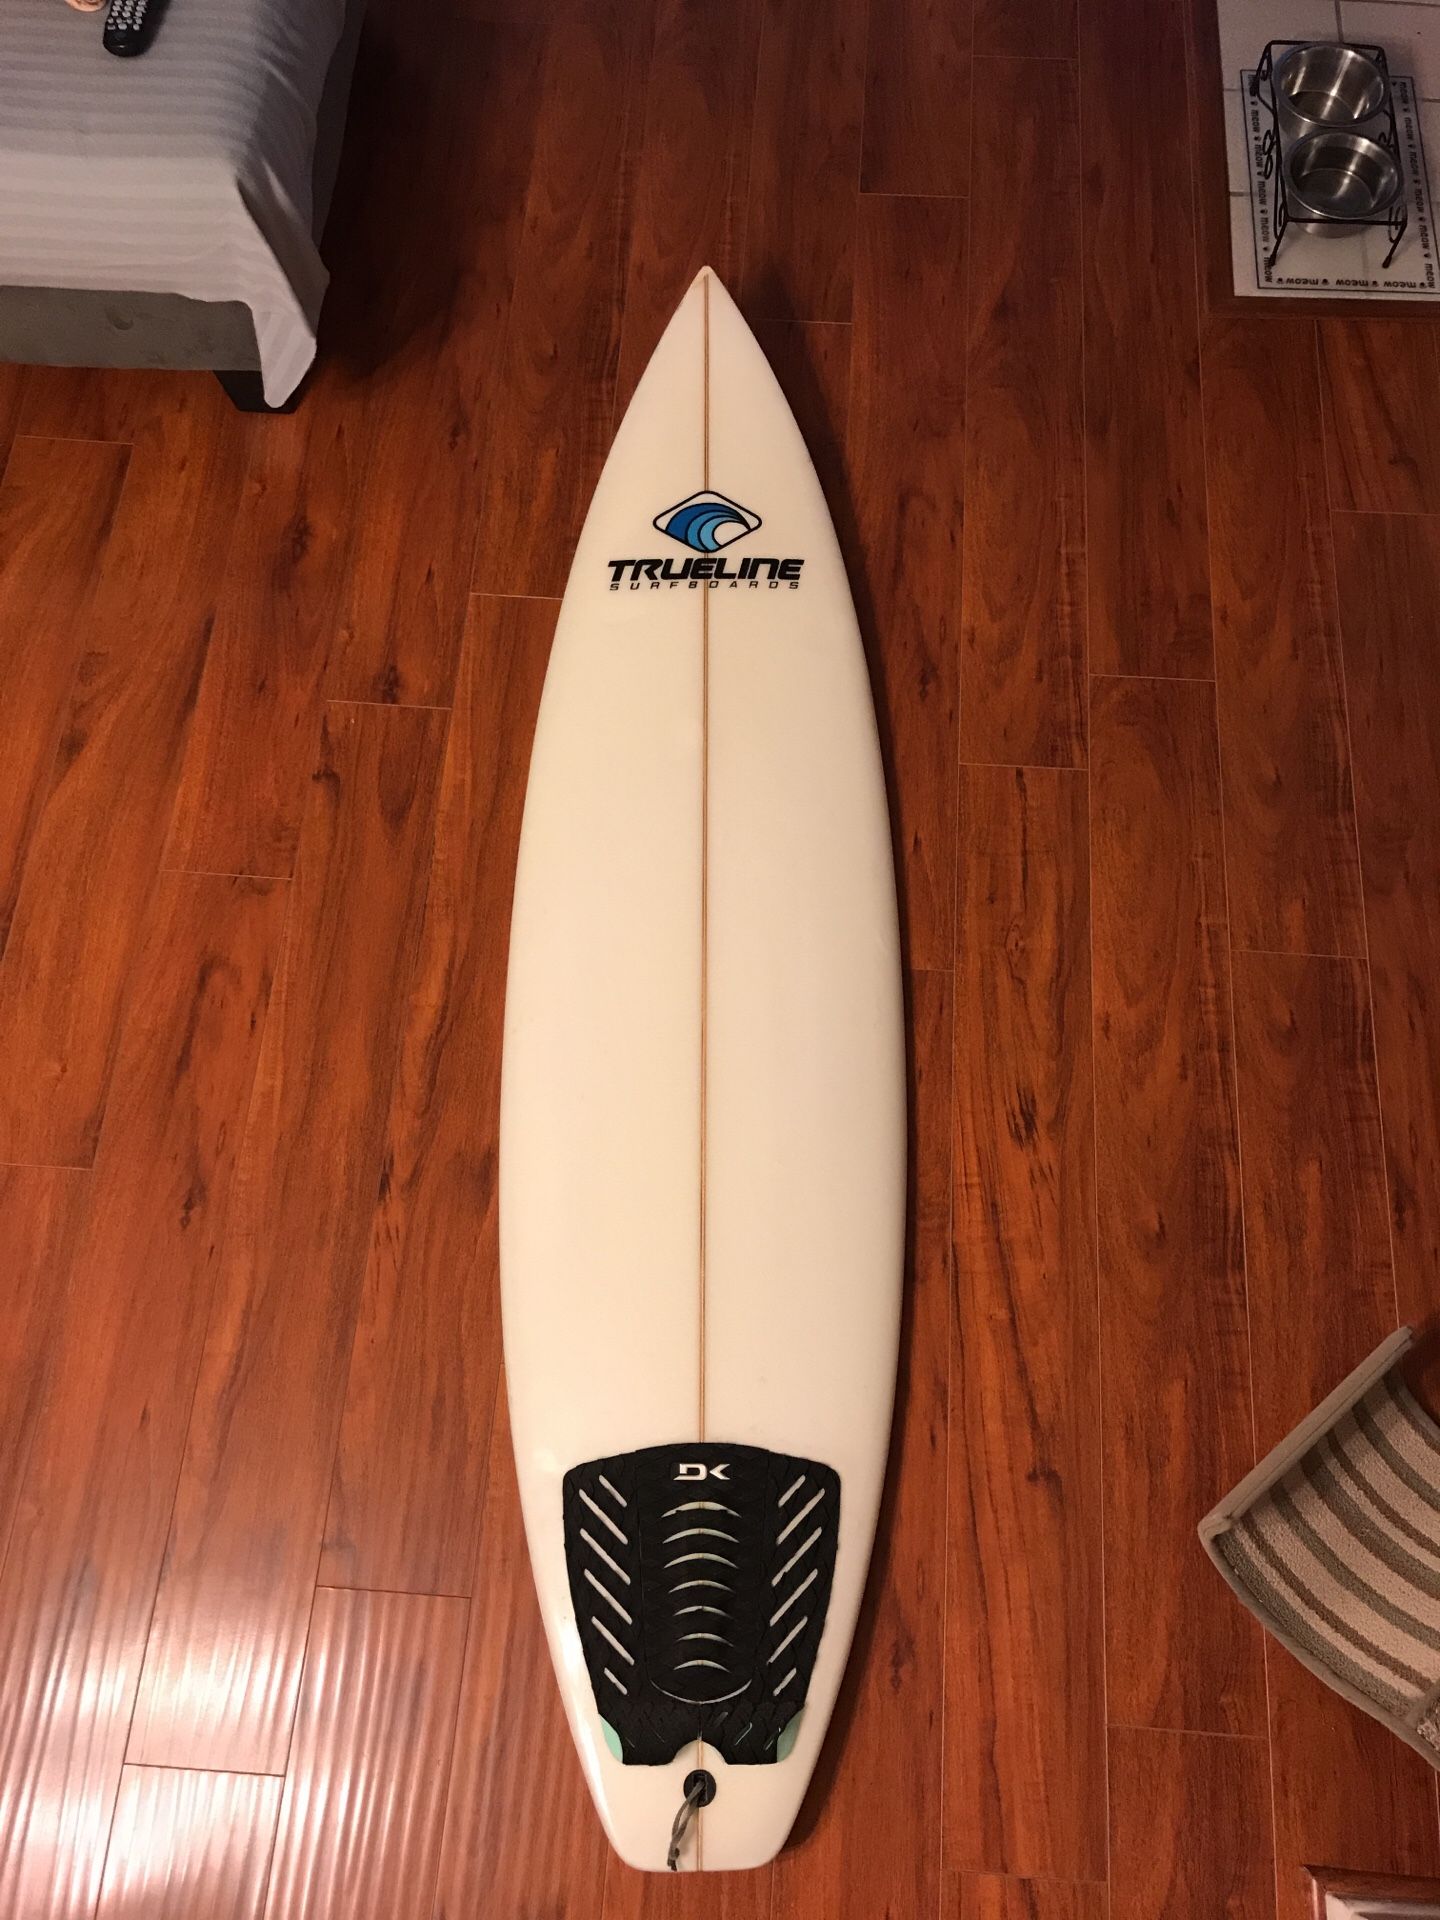 Used surfboard real good price